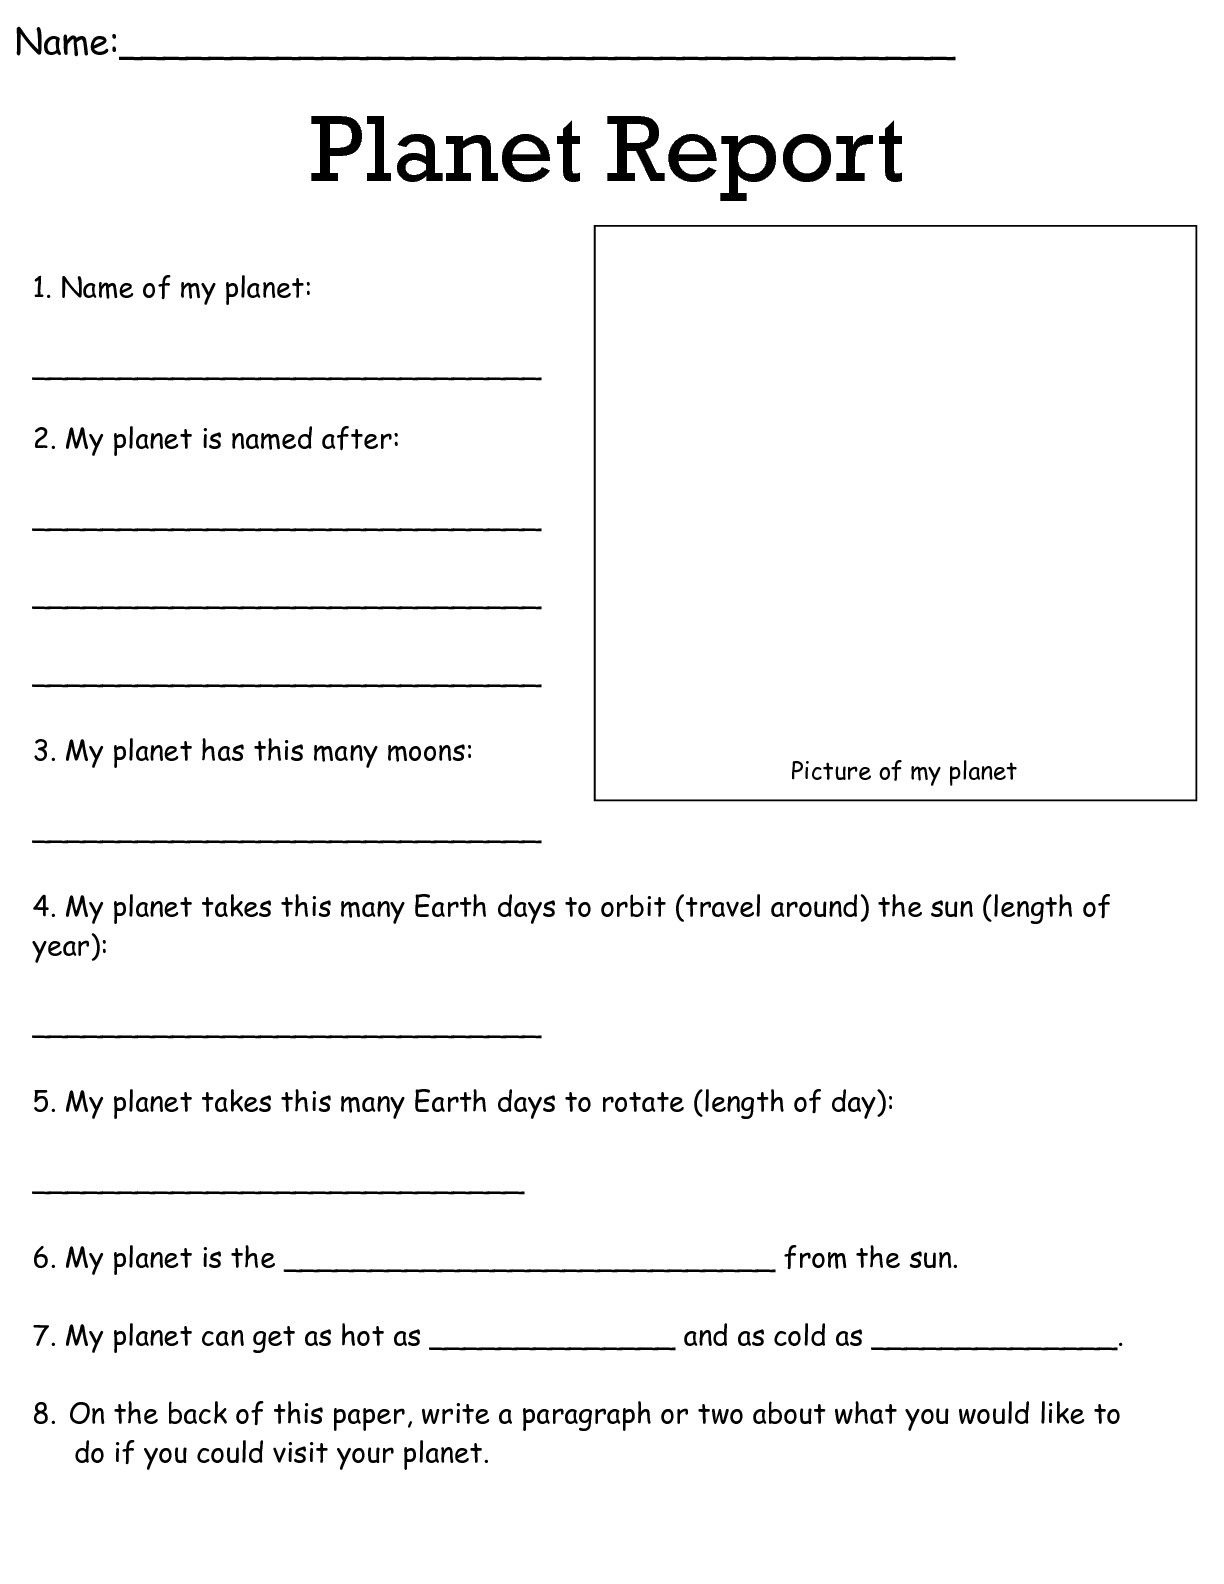 Job Worksheets 5Th &amp;amp;6Th | Science Worksheets Science Worksheets - Free Printable Science Worksheets For Grade 2